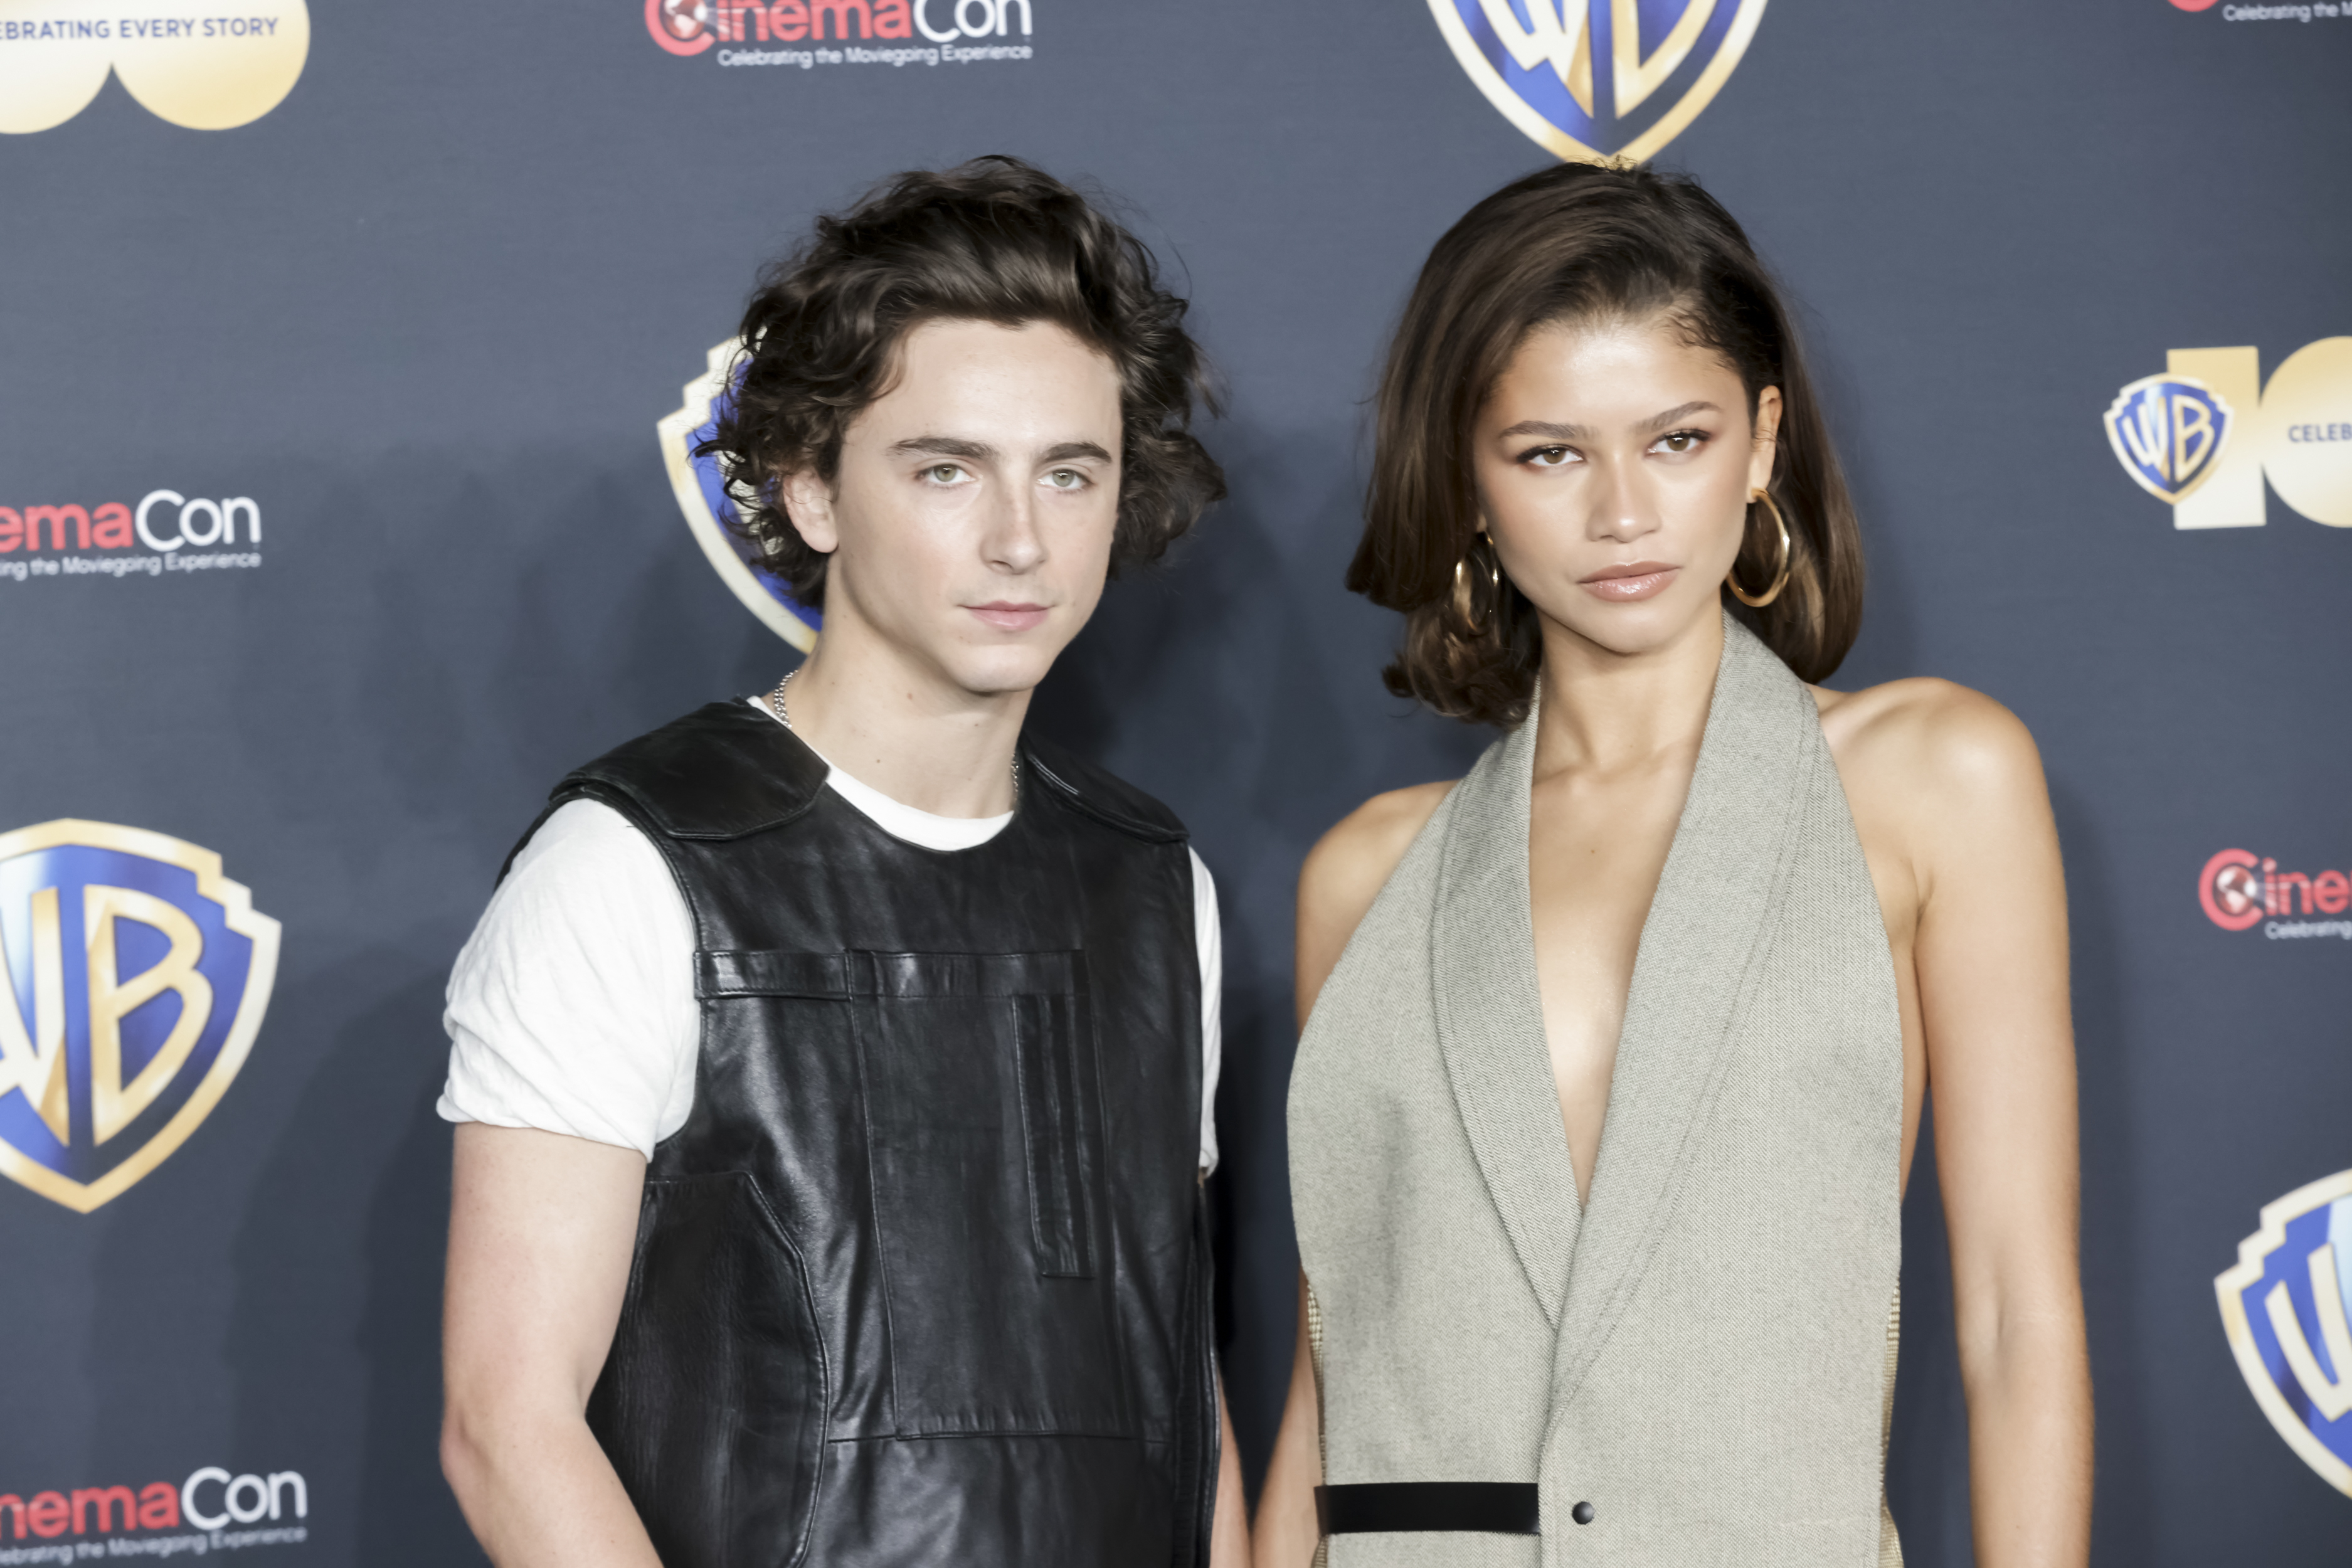 Timmy and Zendaya at a media event